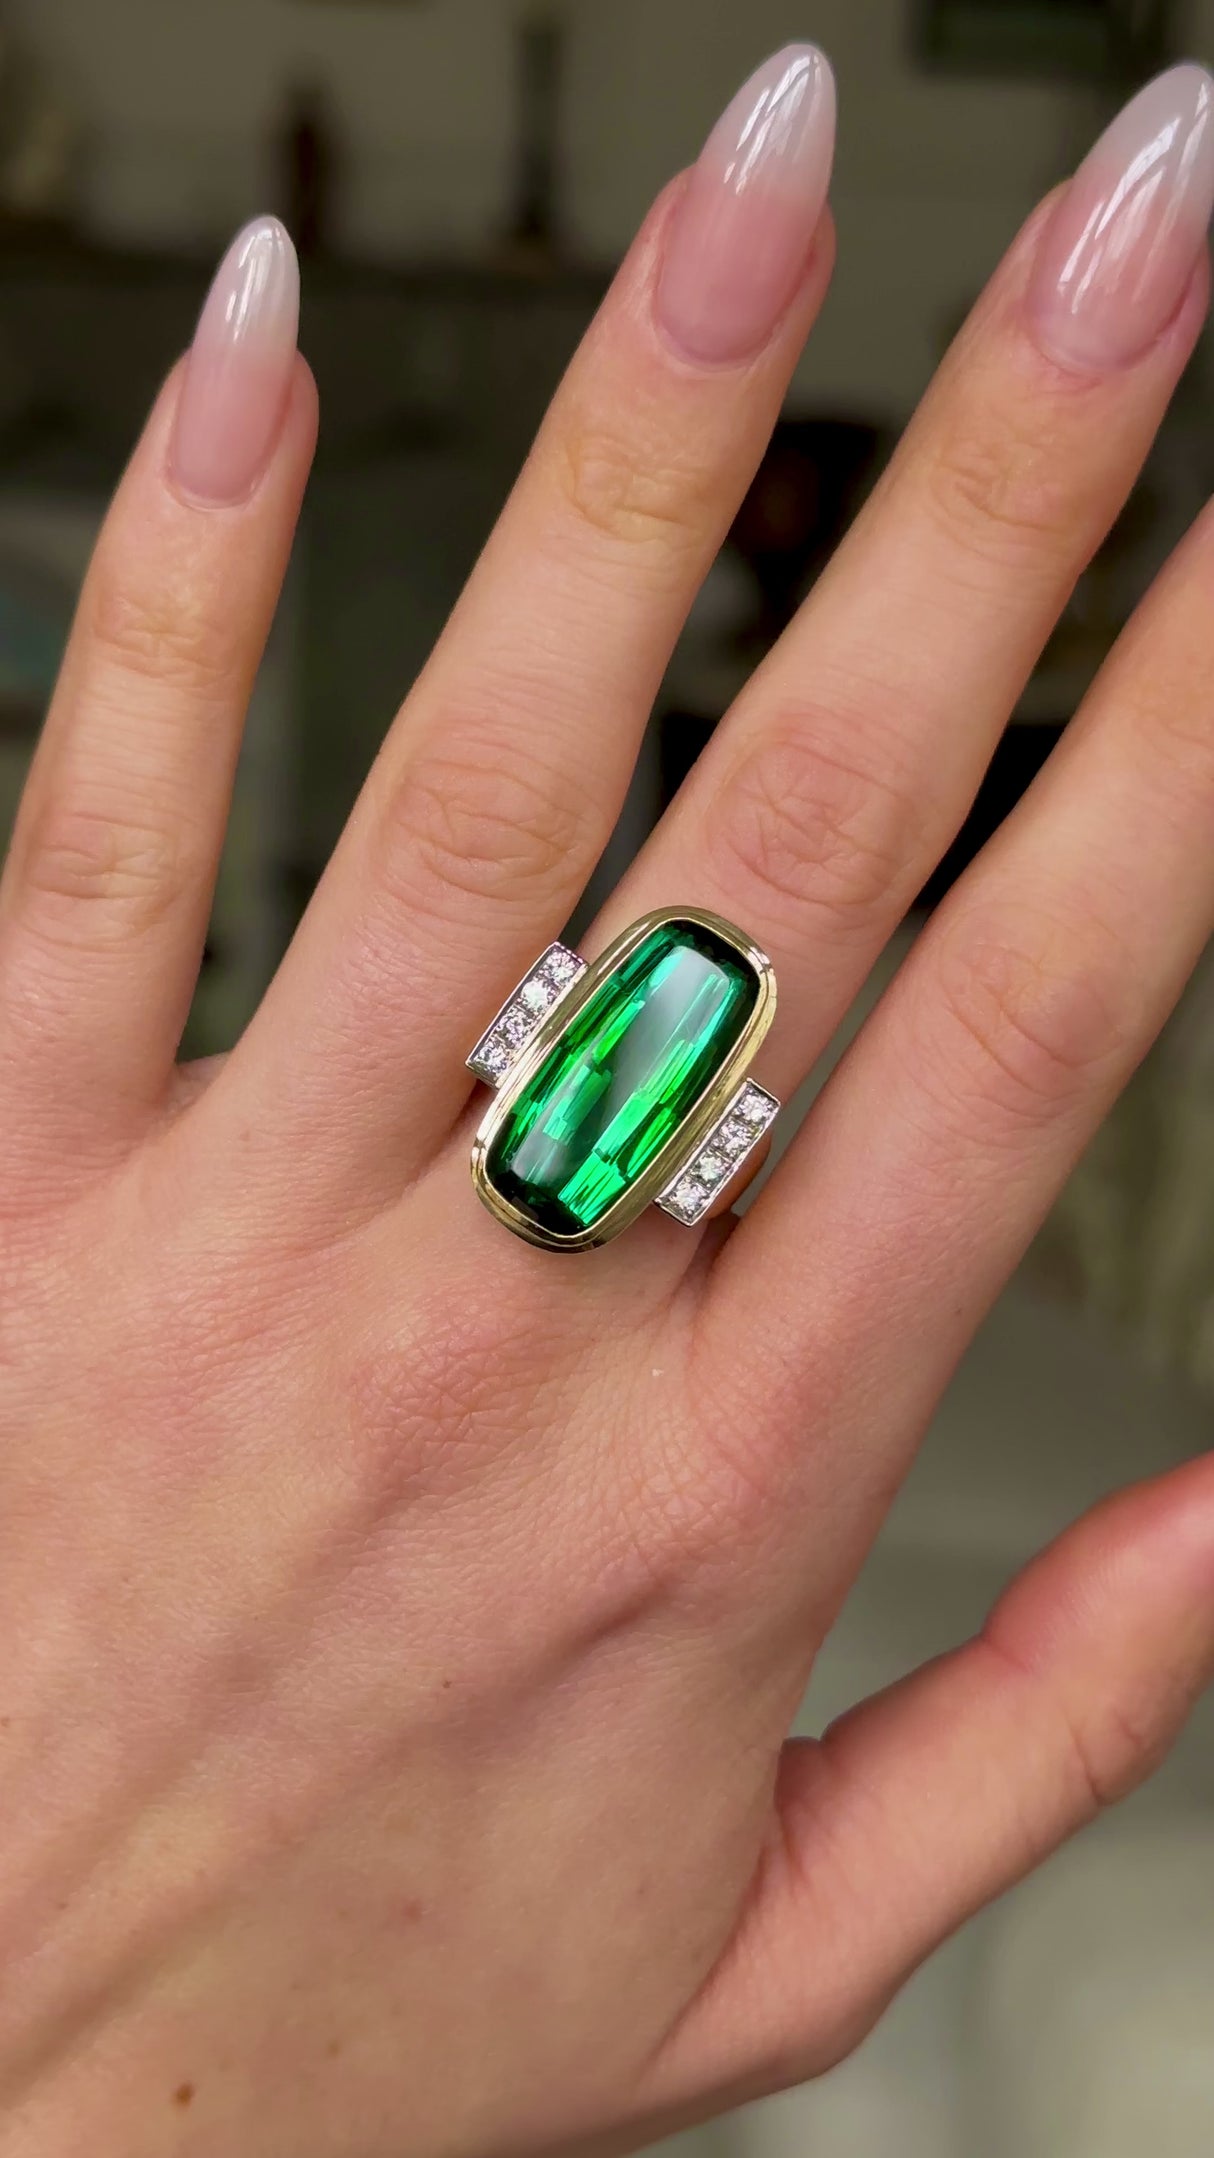 Vintage, Tourmaline and Diamond Cocktail Ring, worn on hand and moved around to give perspective.